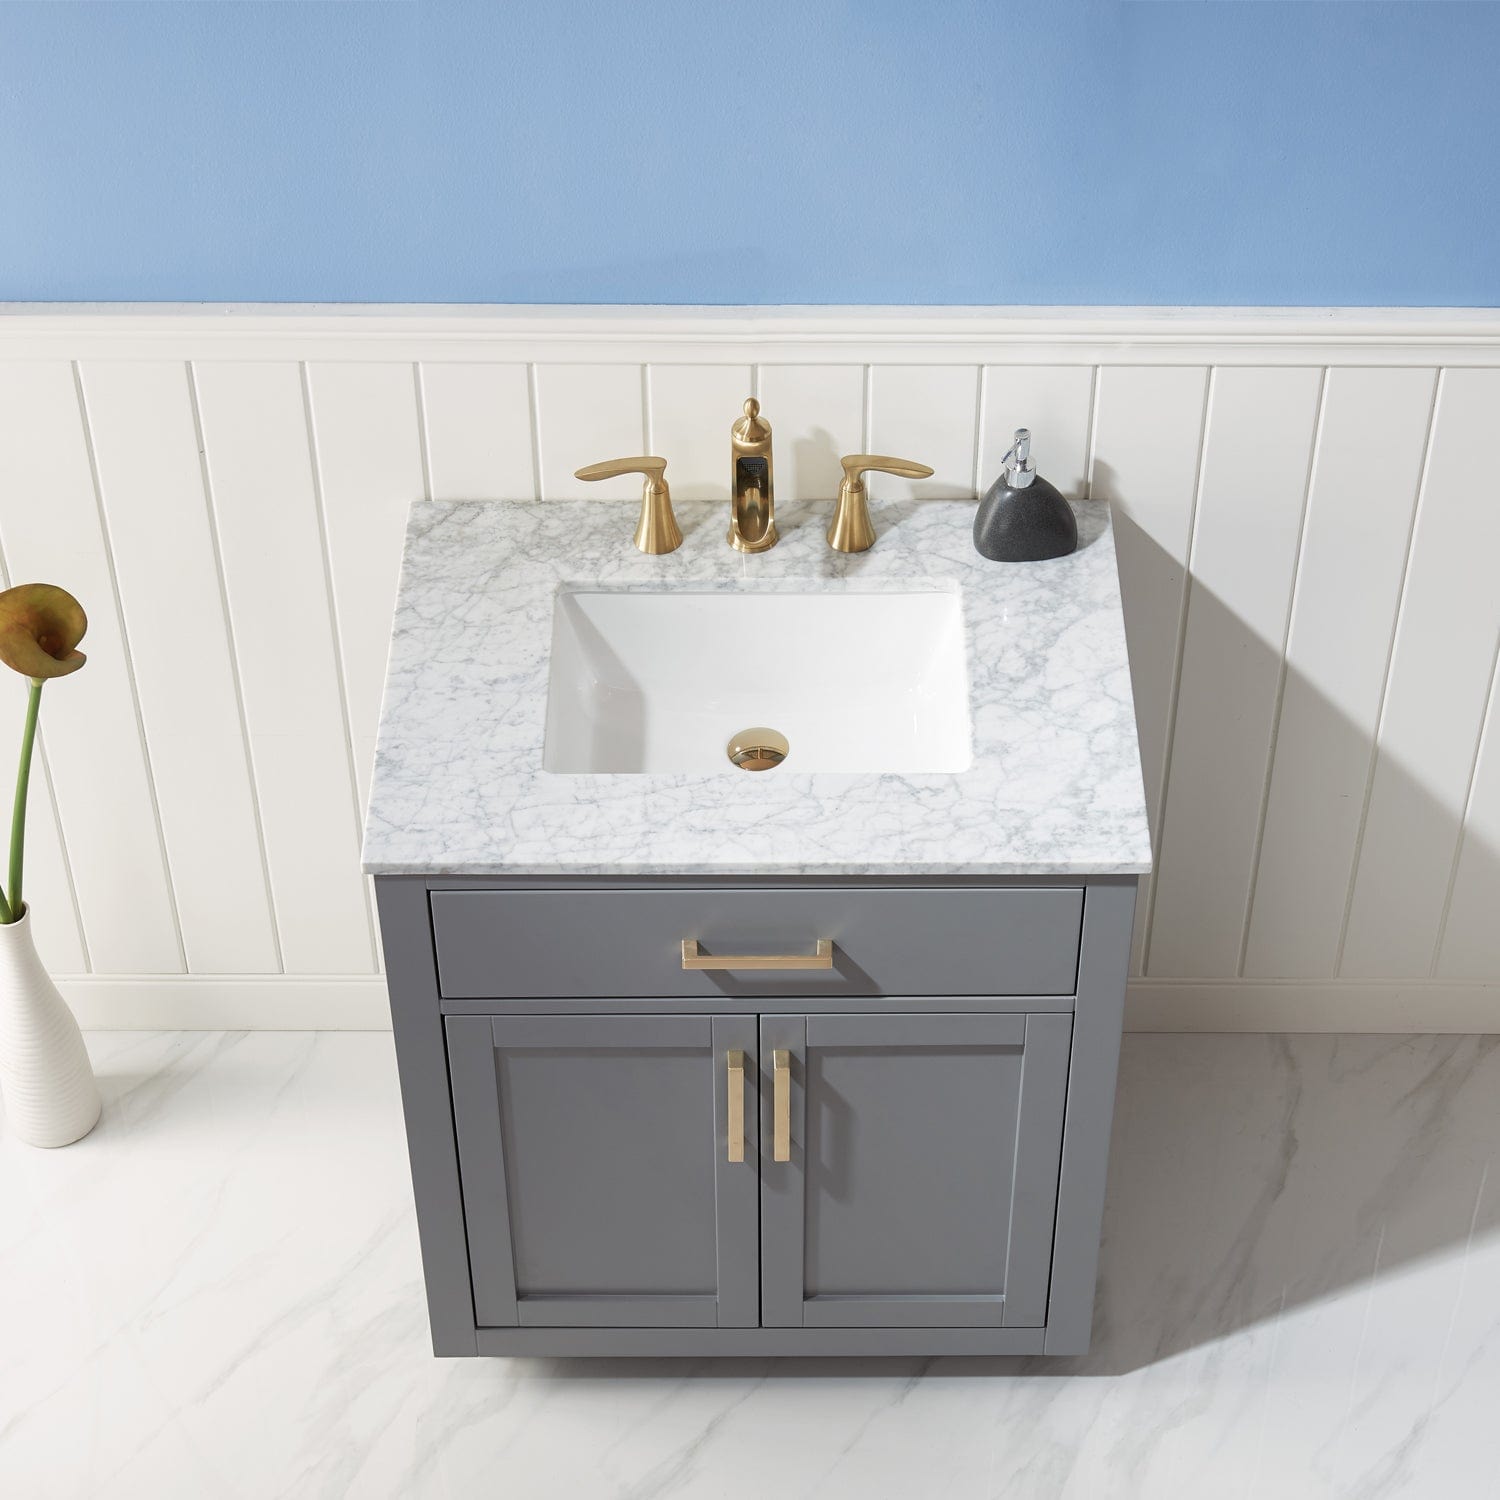 Altair Ivy 30" Single Bathroom Vanity Set in Gray and Carrara White Marble Countertop without Mirror 531030-GR-CA-NM - Molaix631112971041Vanity531030-GR-CA-NM